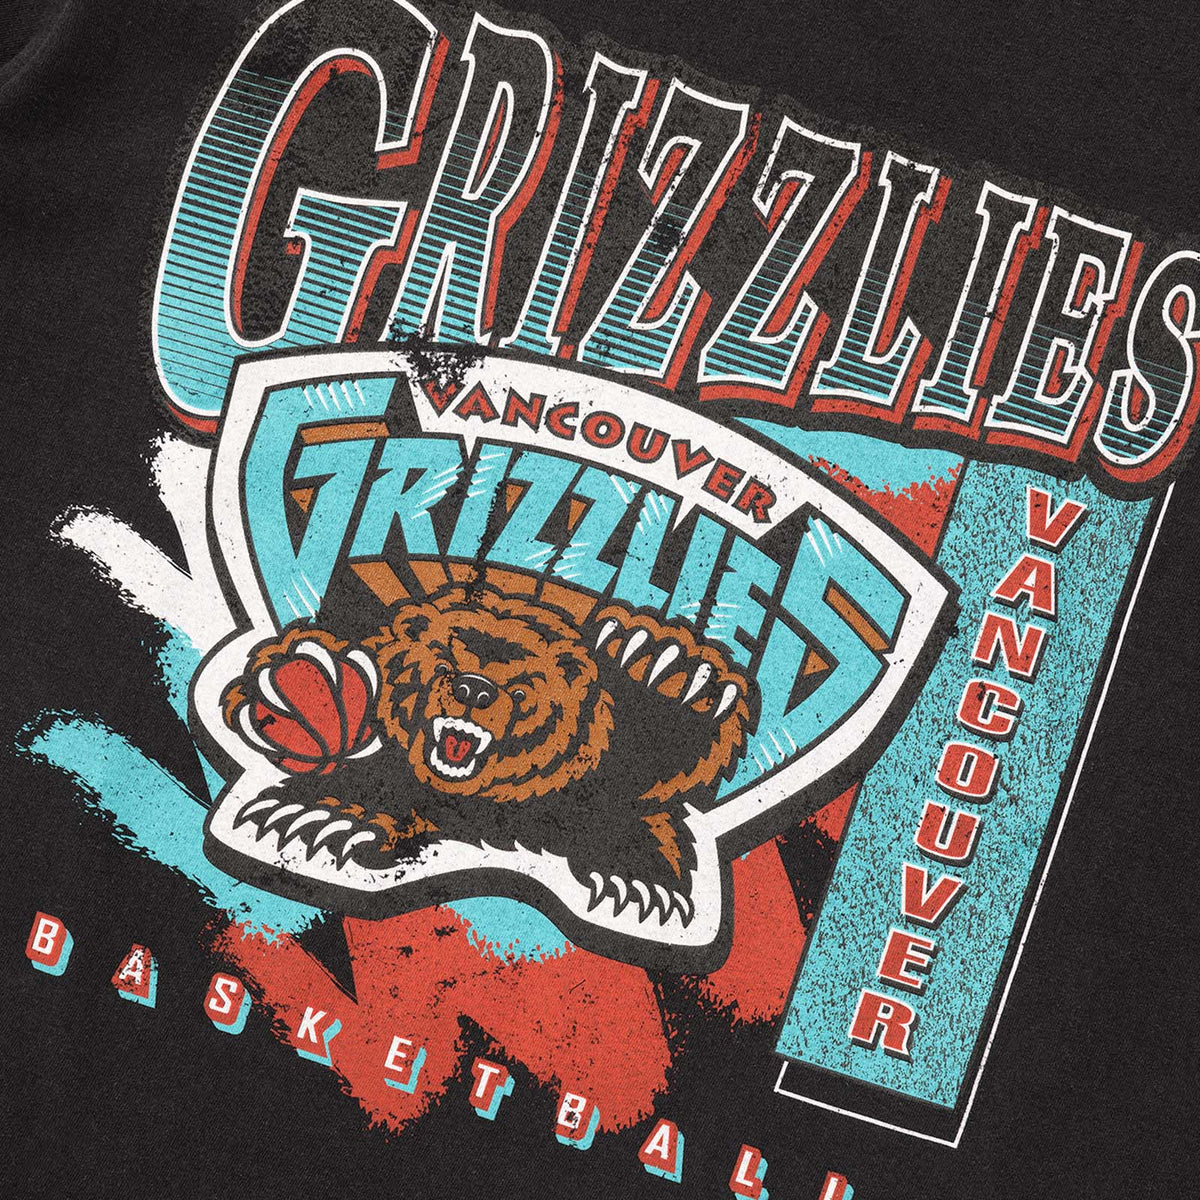 Vancouver Grizzlies Brush Off Tee - Faded Black